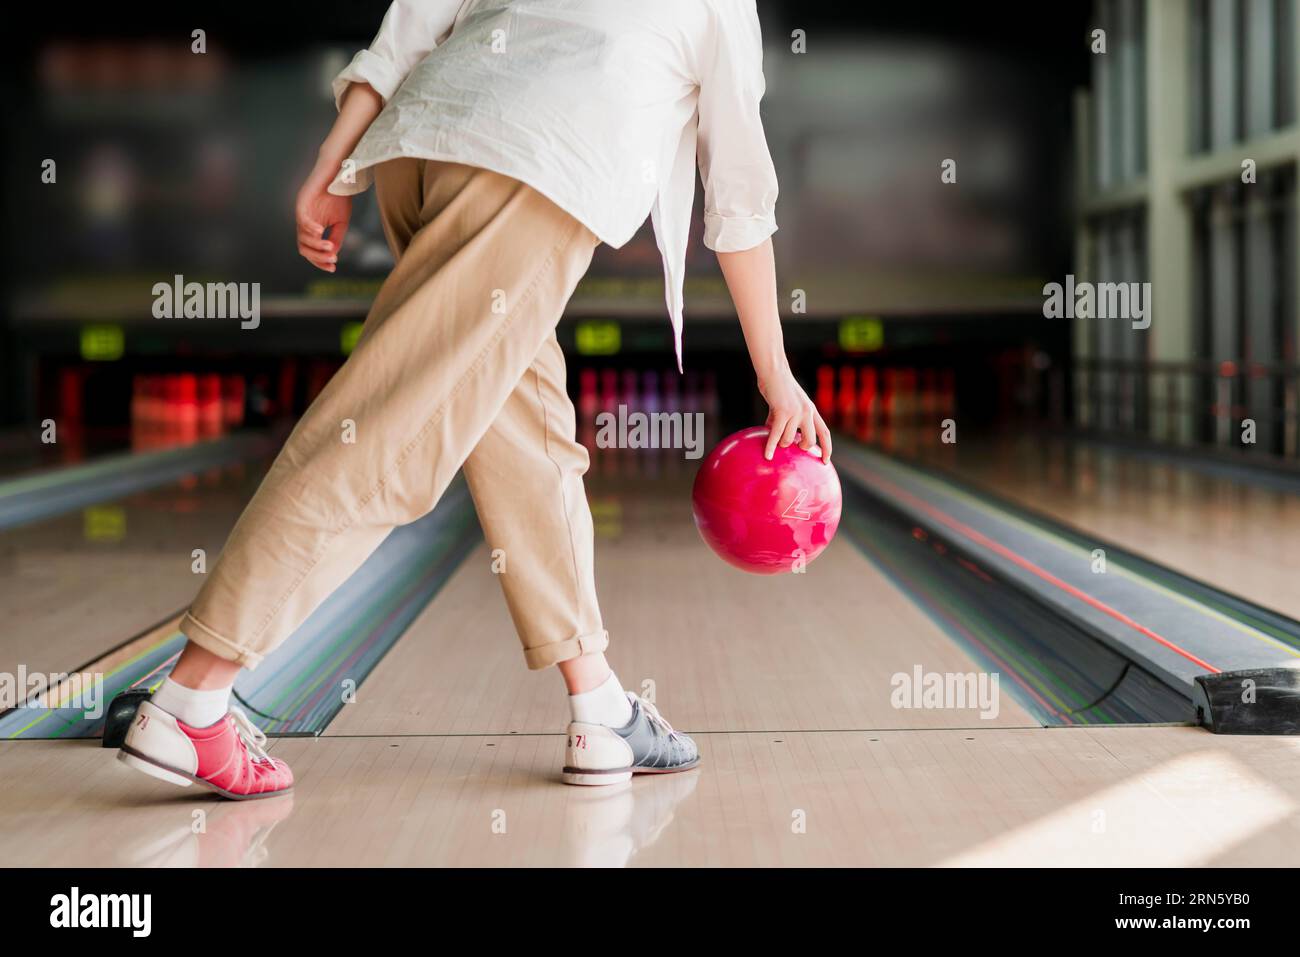 Person throwing red bowling ball Stock Photo